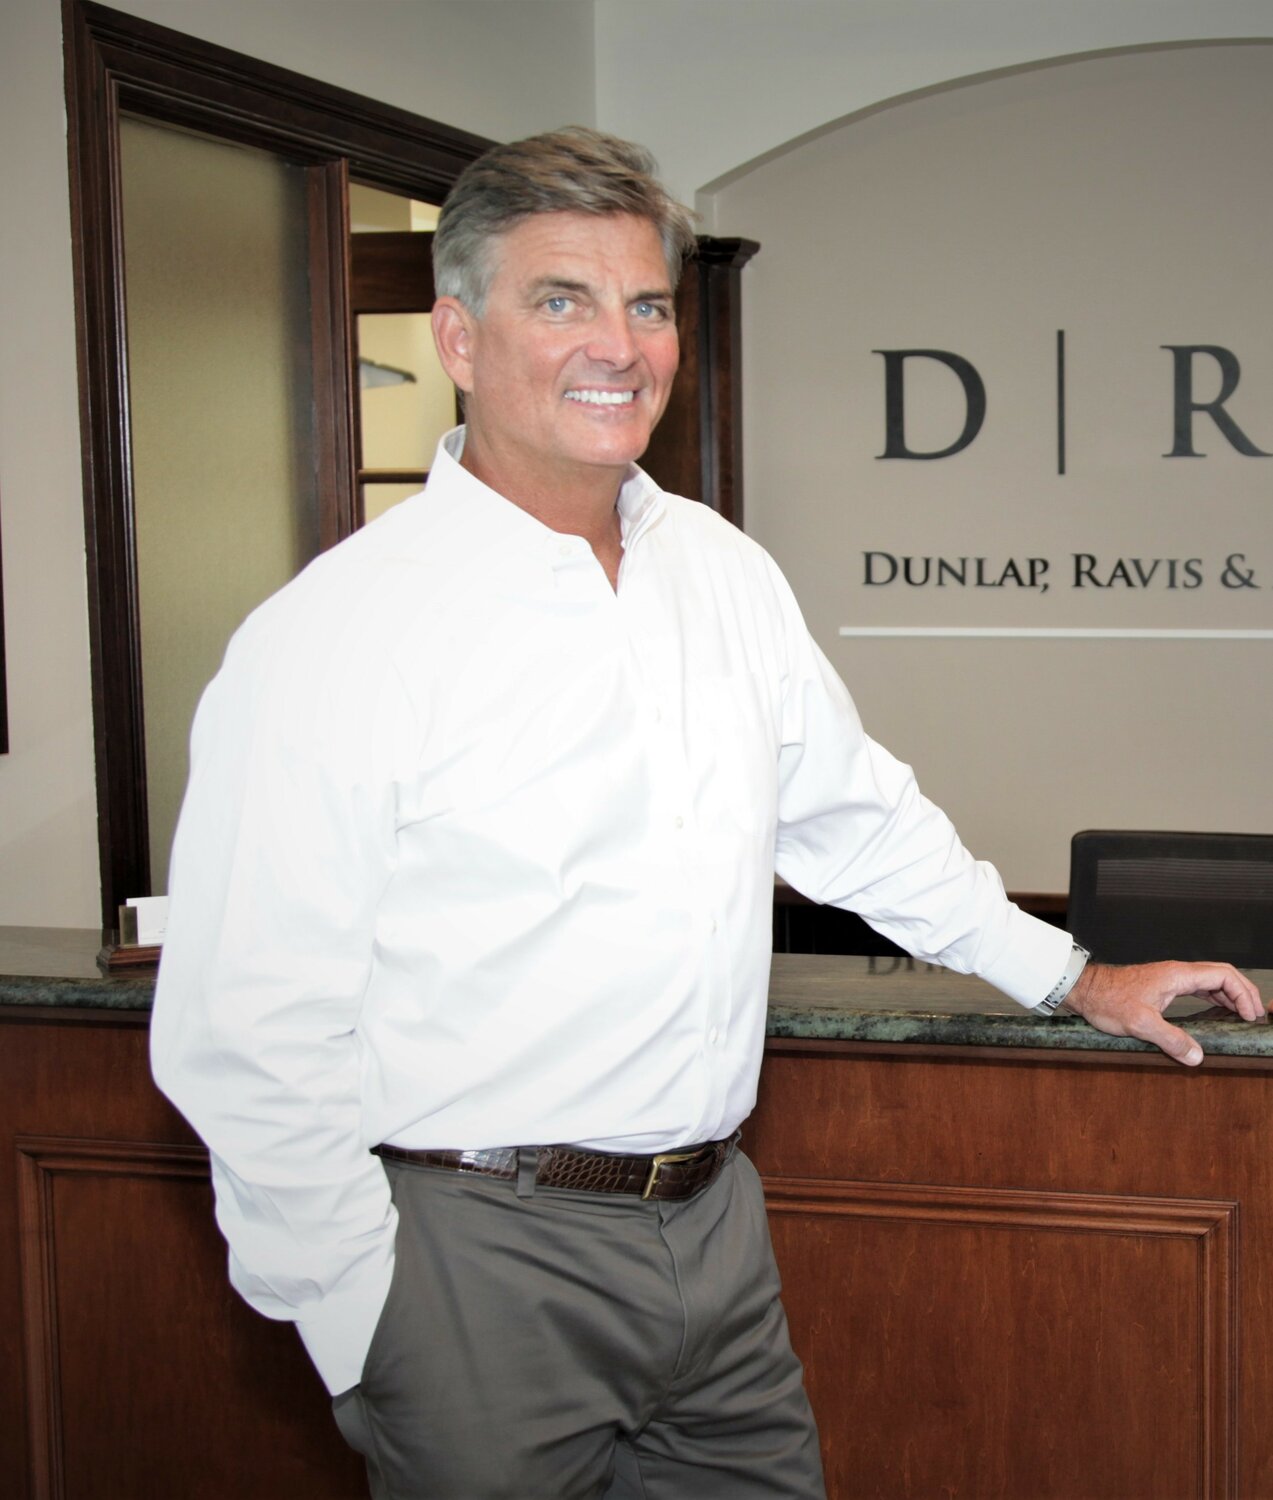 Attorney David Dunlap in the office of his law practice.